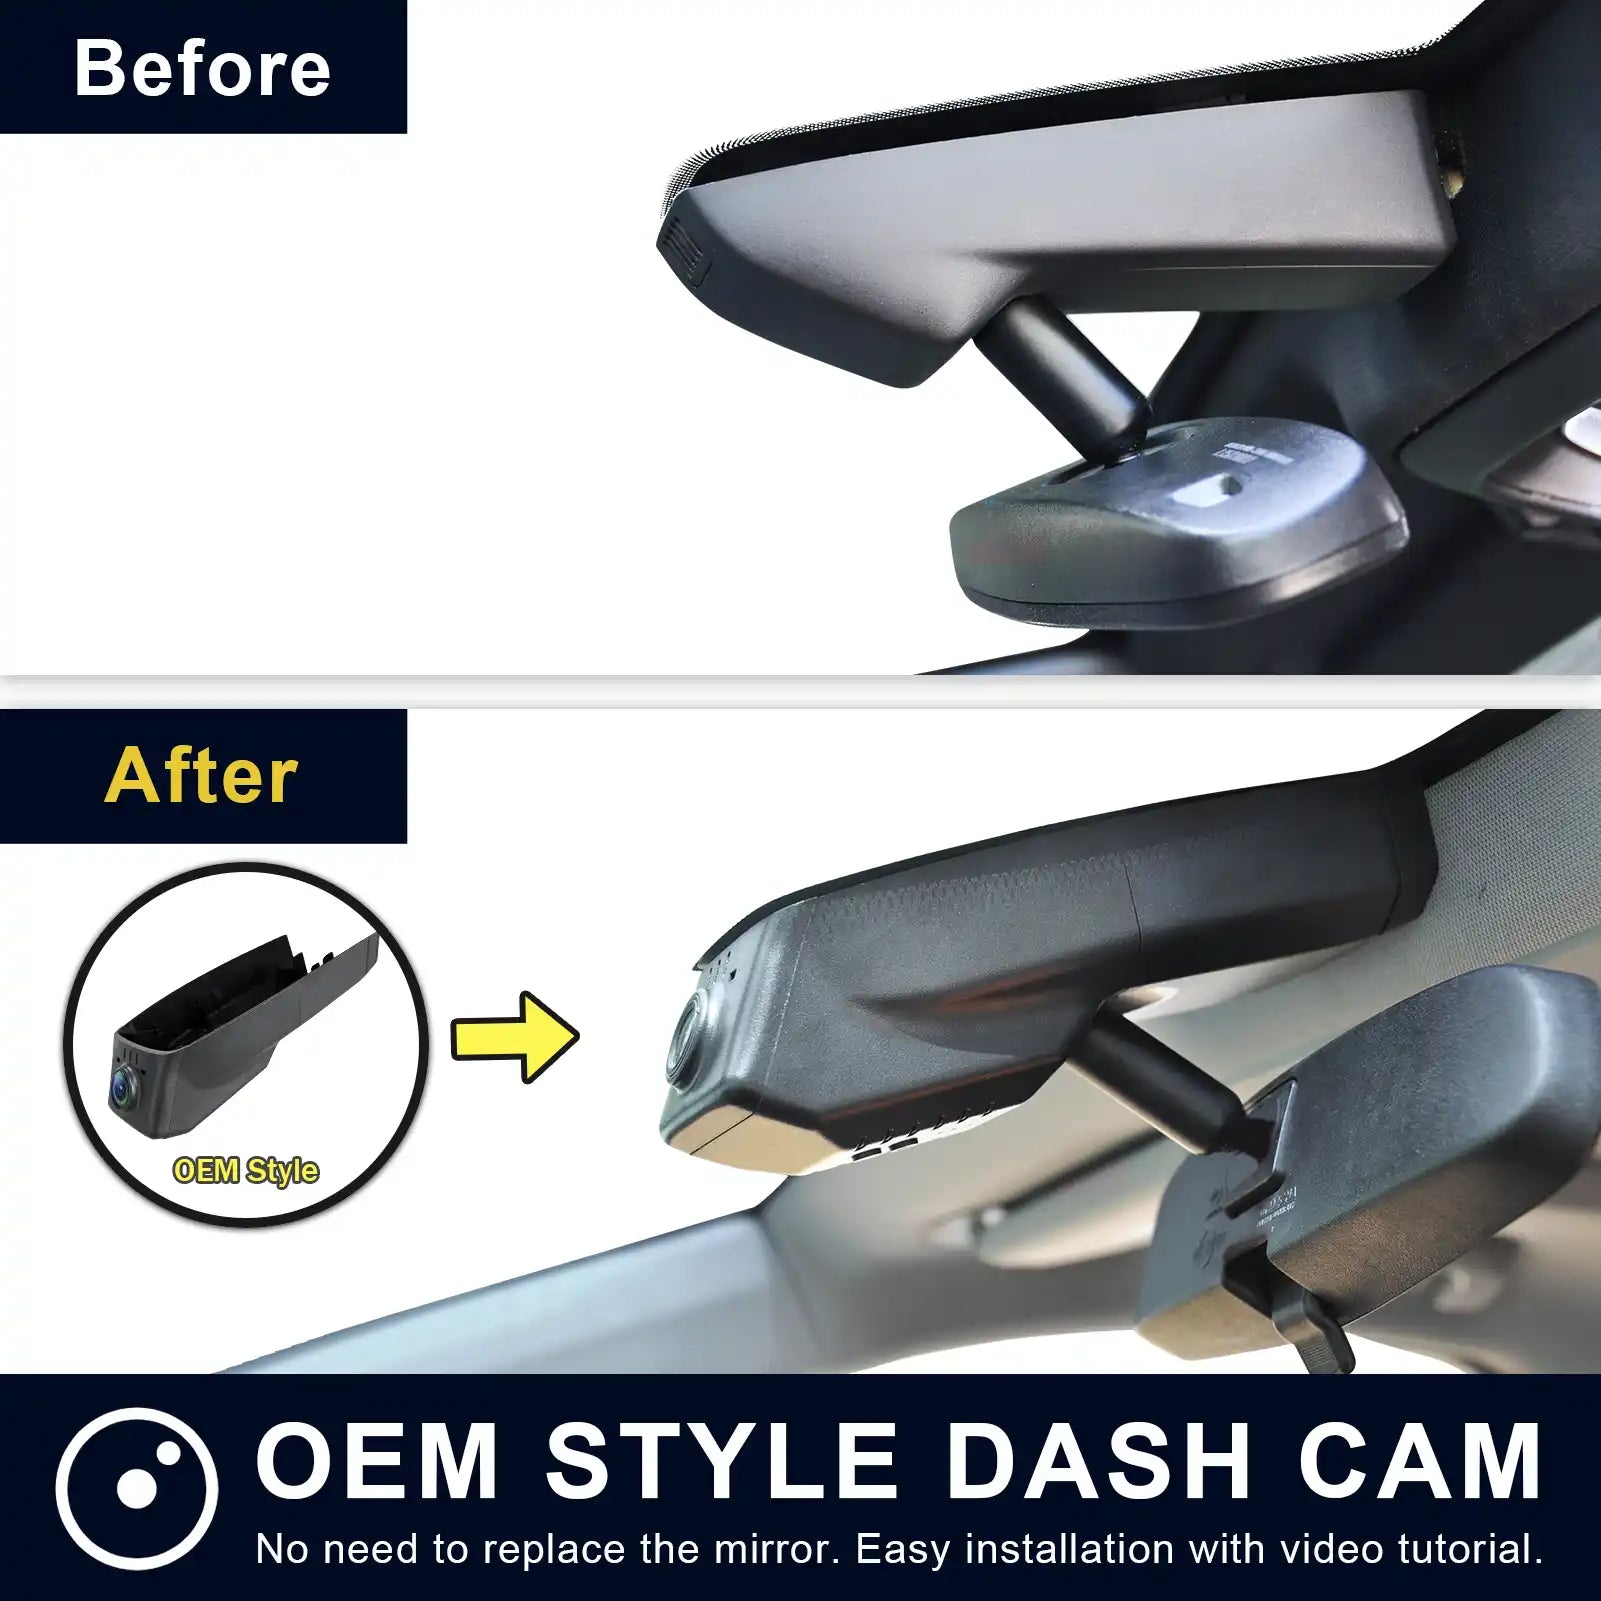 XT6-XT5 dash cam before and after installation 